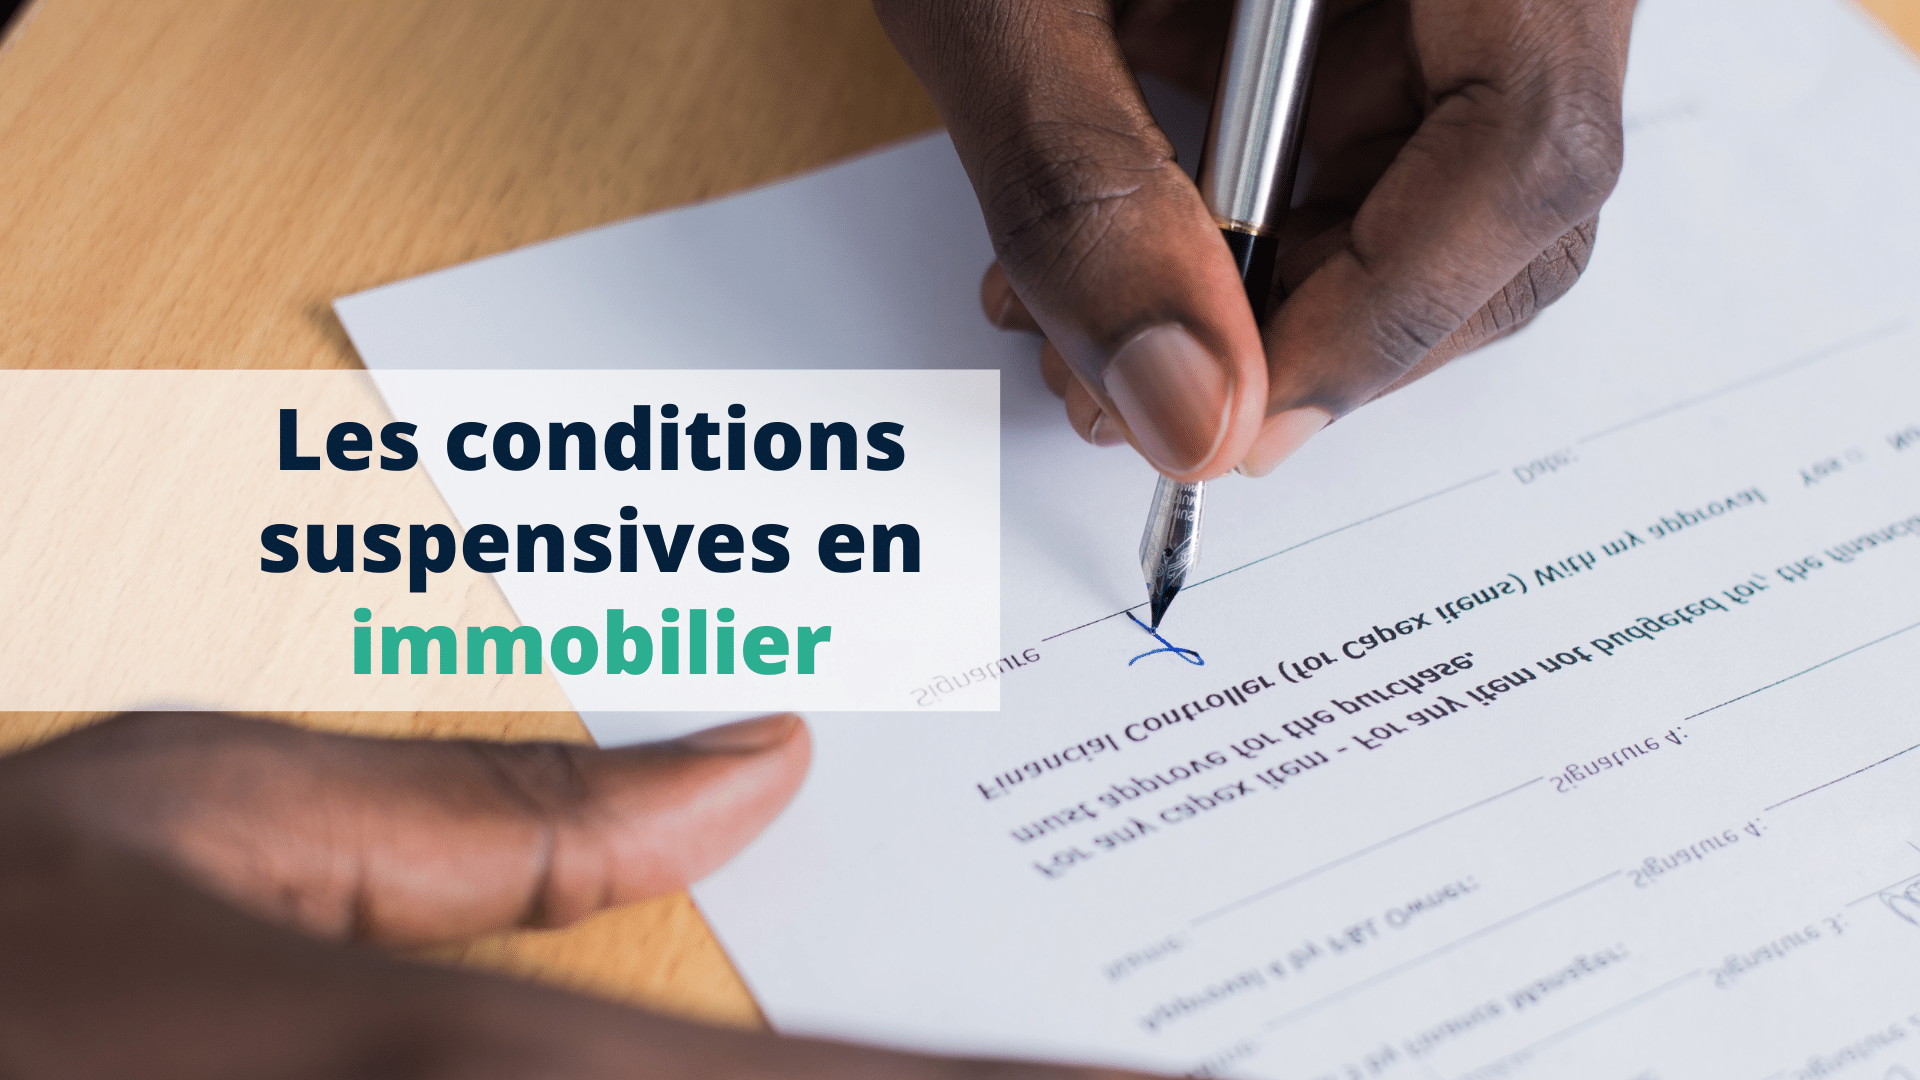 Les conditions suspensives en immobilier - Start Learning